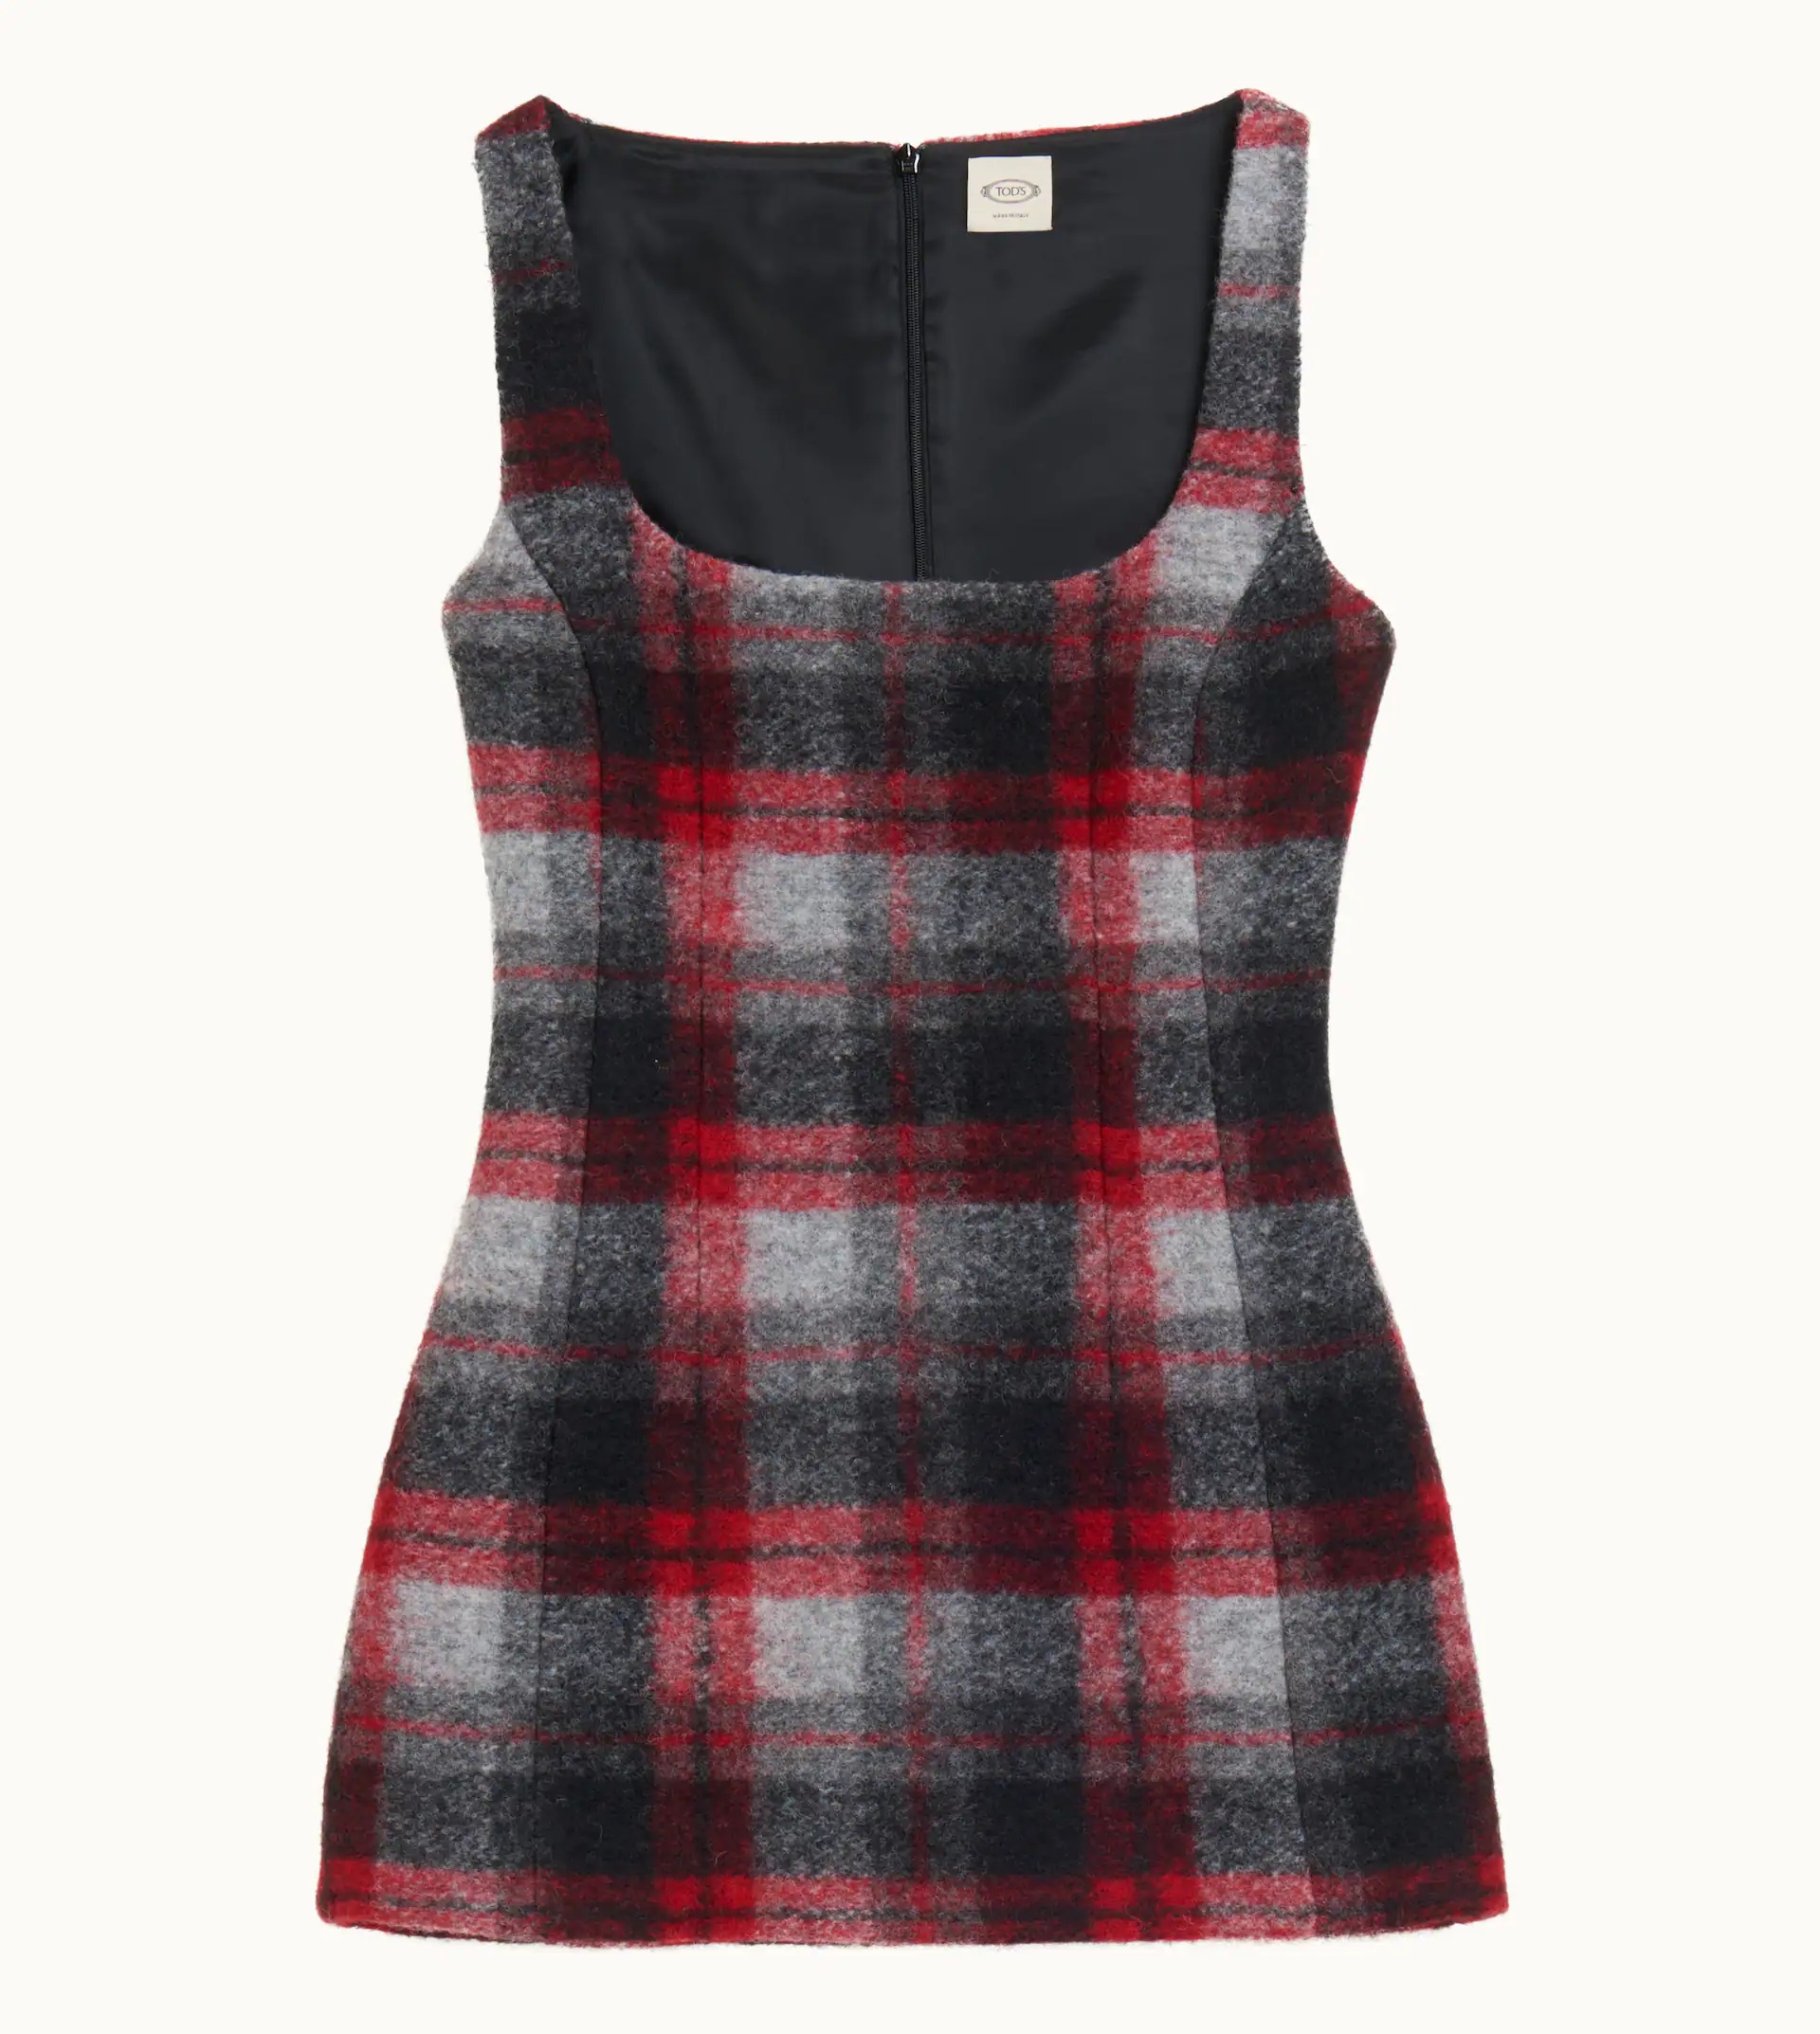 DRESS IN MIXED WOOL - RED, GREY, BLACK - 1